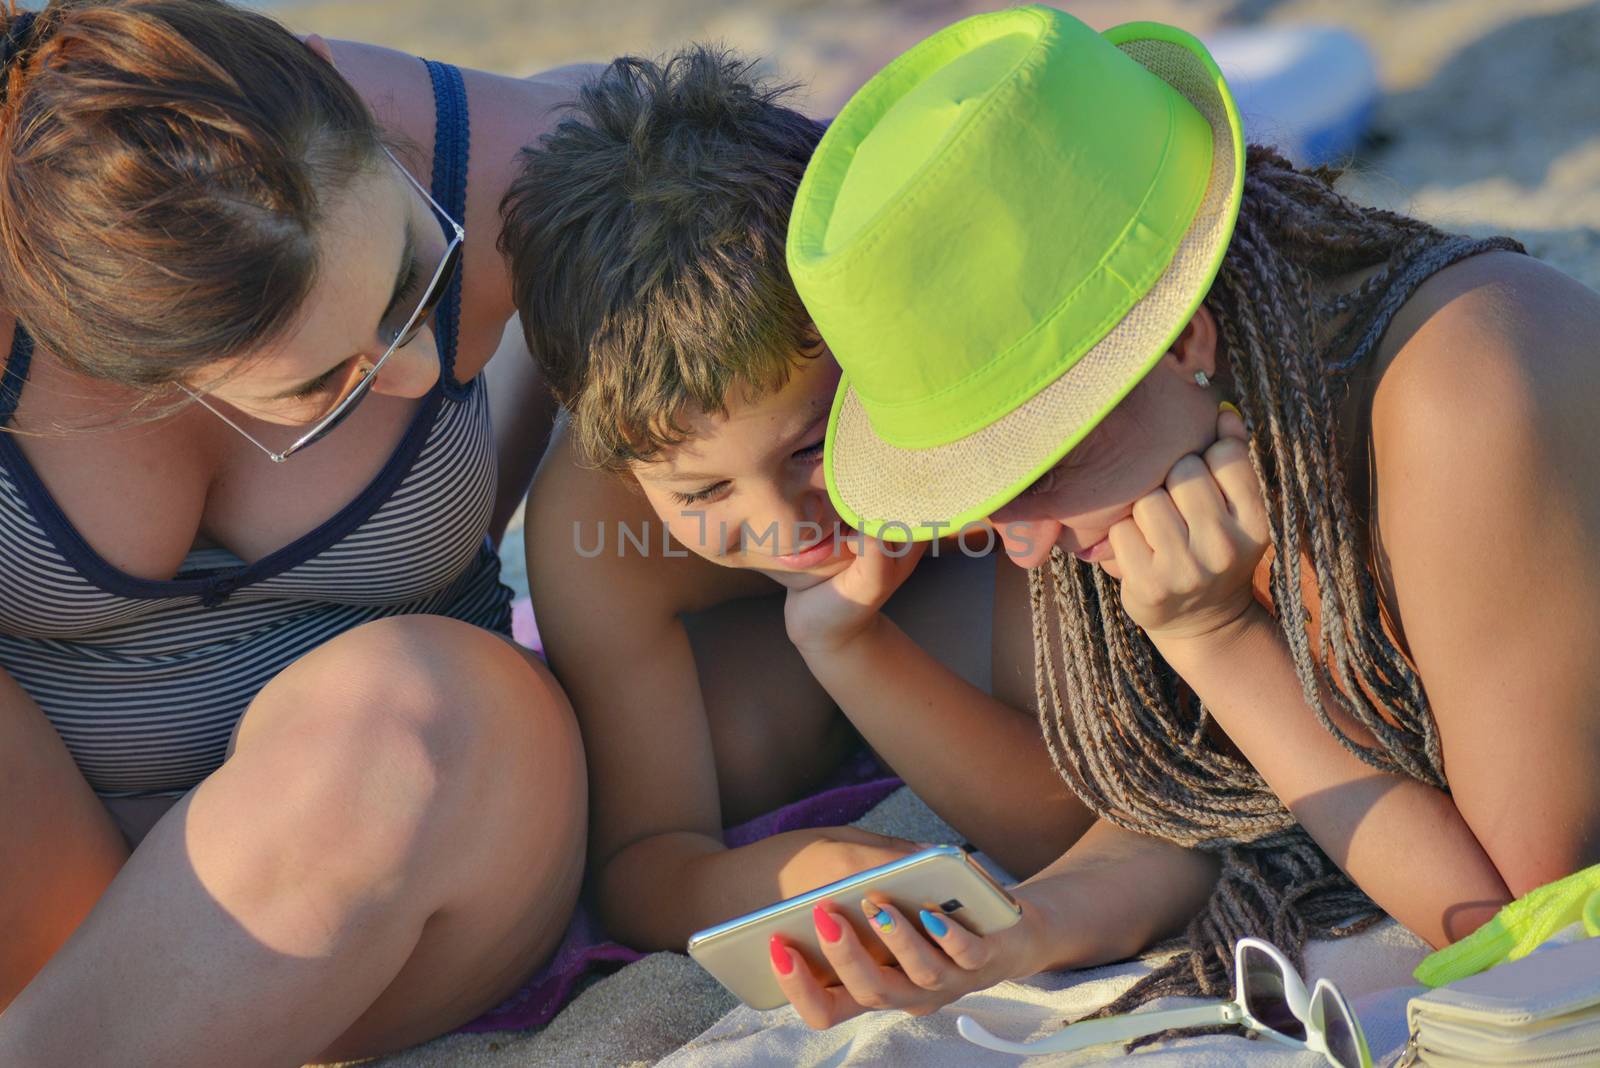 Happy three on the beach - two females and a boy are looking in a smartphone.